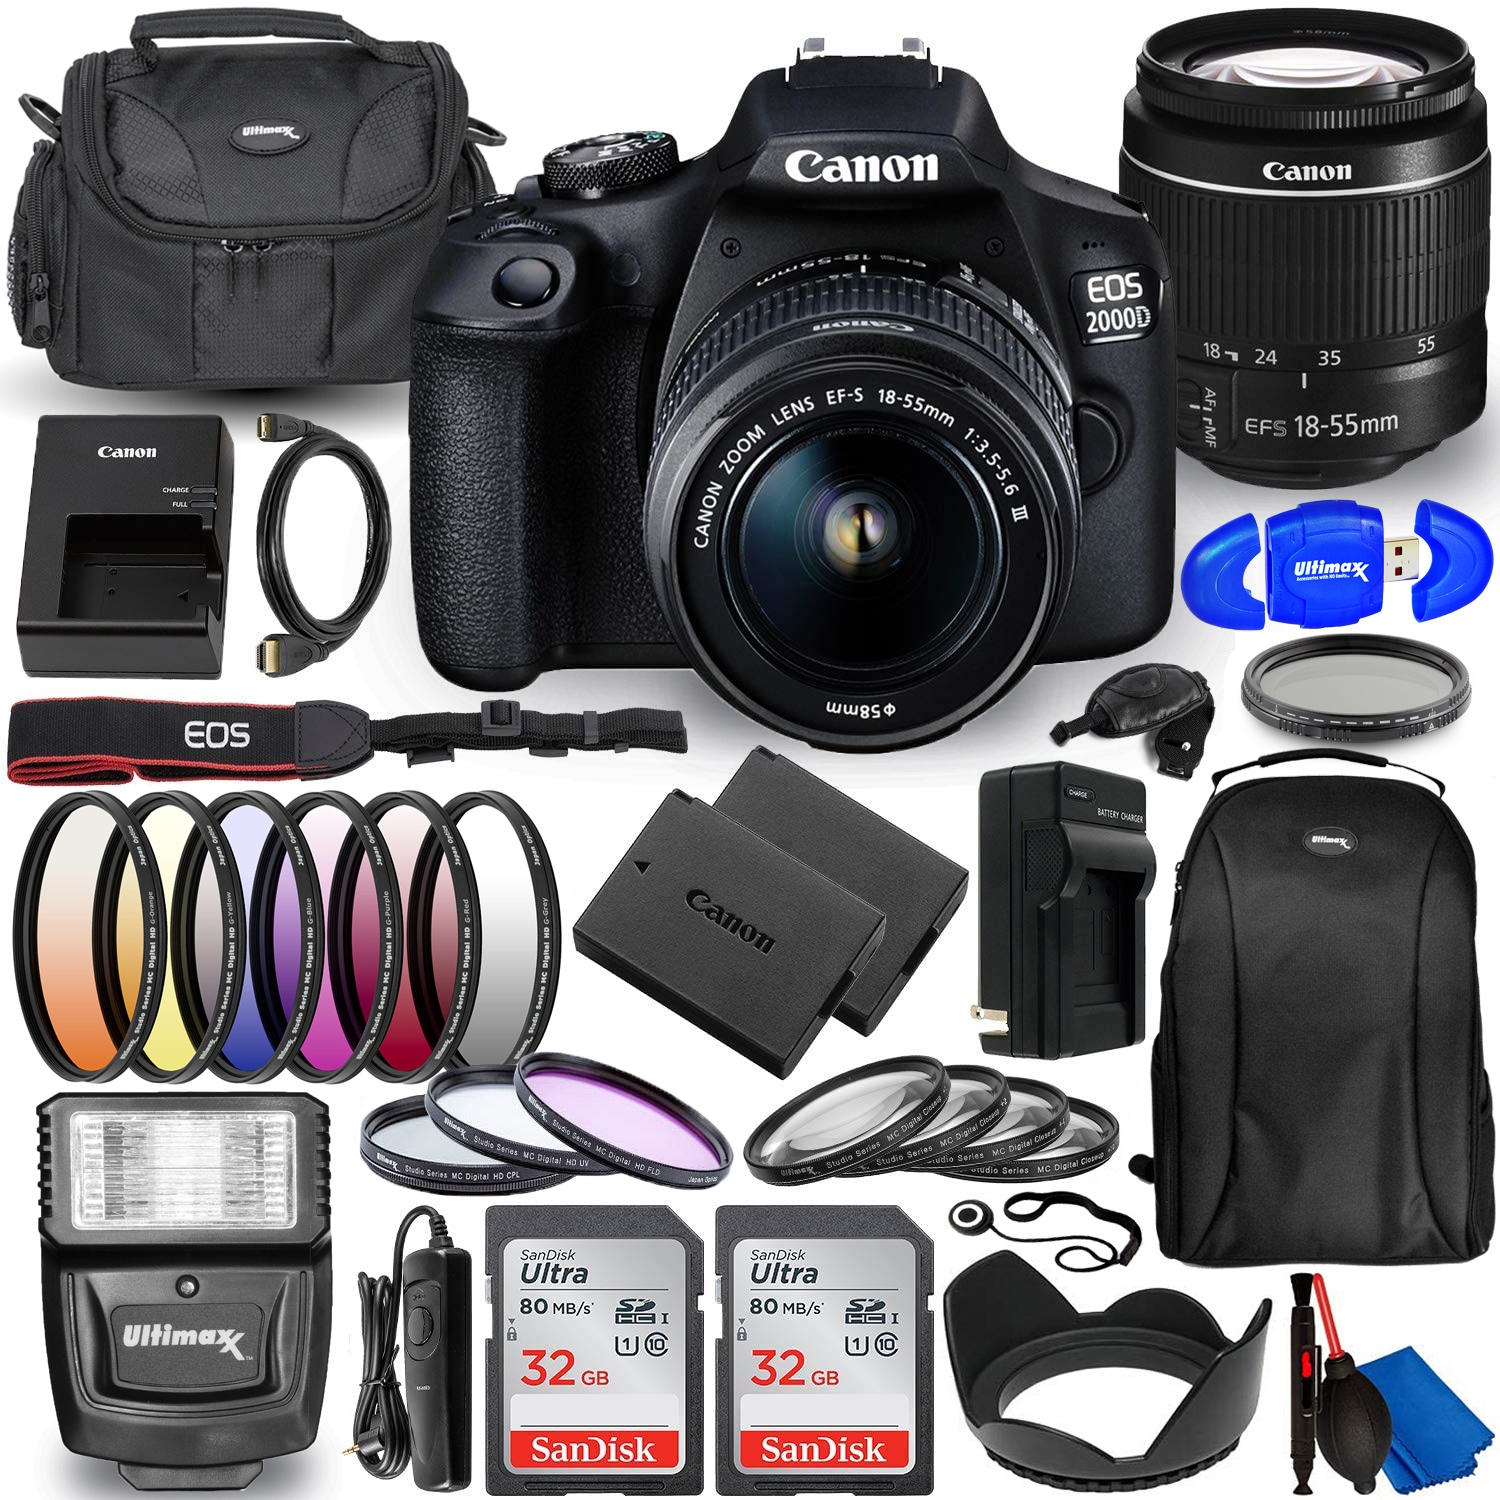 Canon EOS 2000D (Rebel T7) DSLR Camera with EF-S 18-55mm f/3.5-5.6 DC III Lens - Deluxe Bundle Includes: Dual Ultra 32GB (64GB) SD, Extra Battery and Charger, LED Light Kit, Carrying Case and More